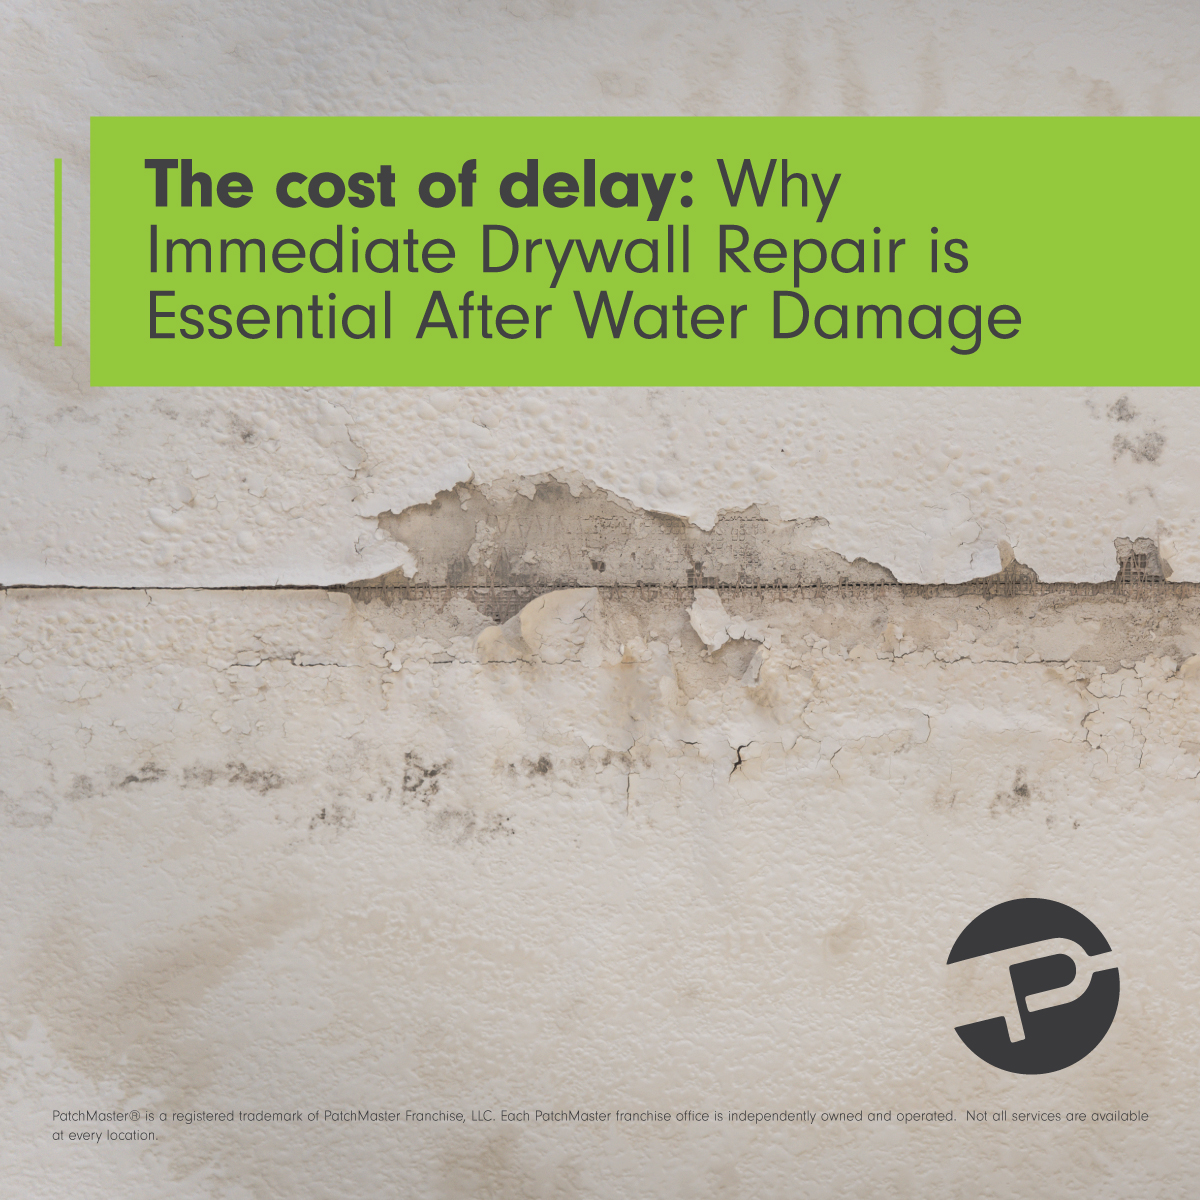 The Cost of Delay: Why Immediate Drywall Repair is Essential After Water Damage